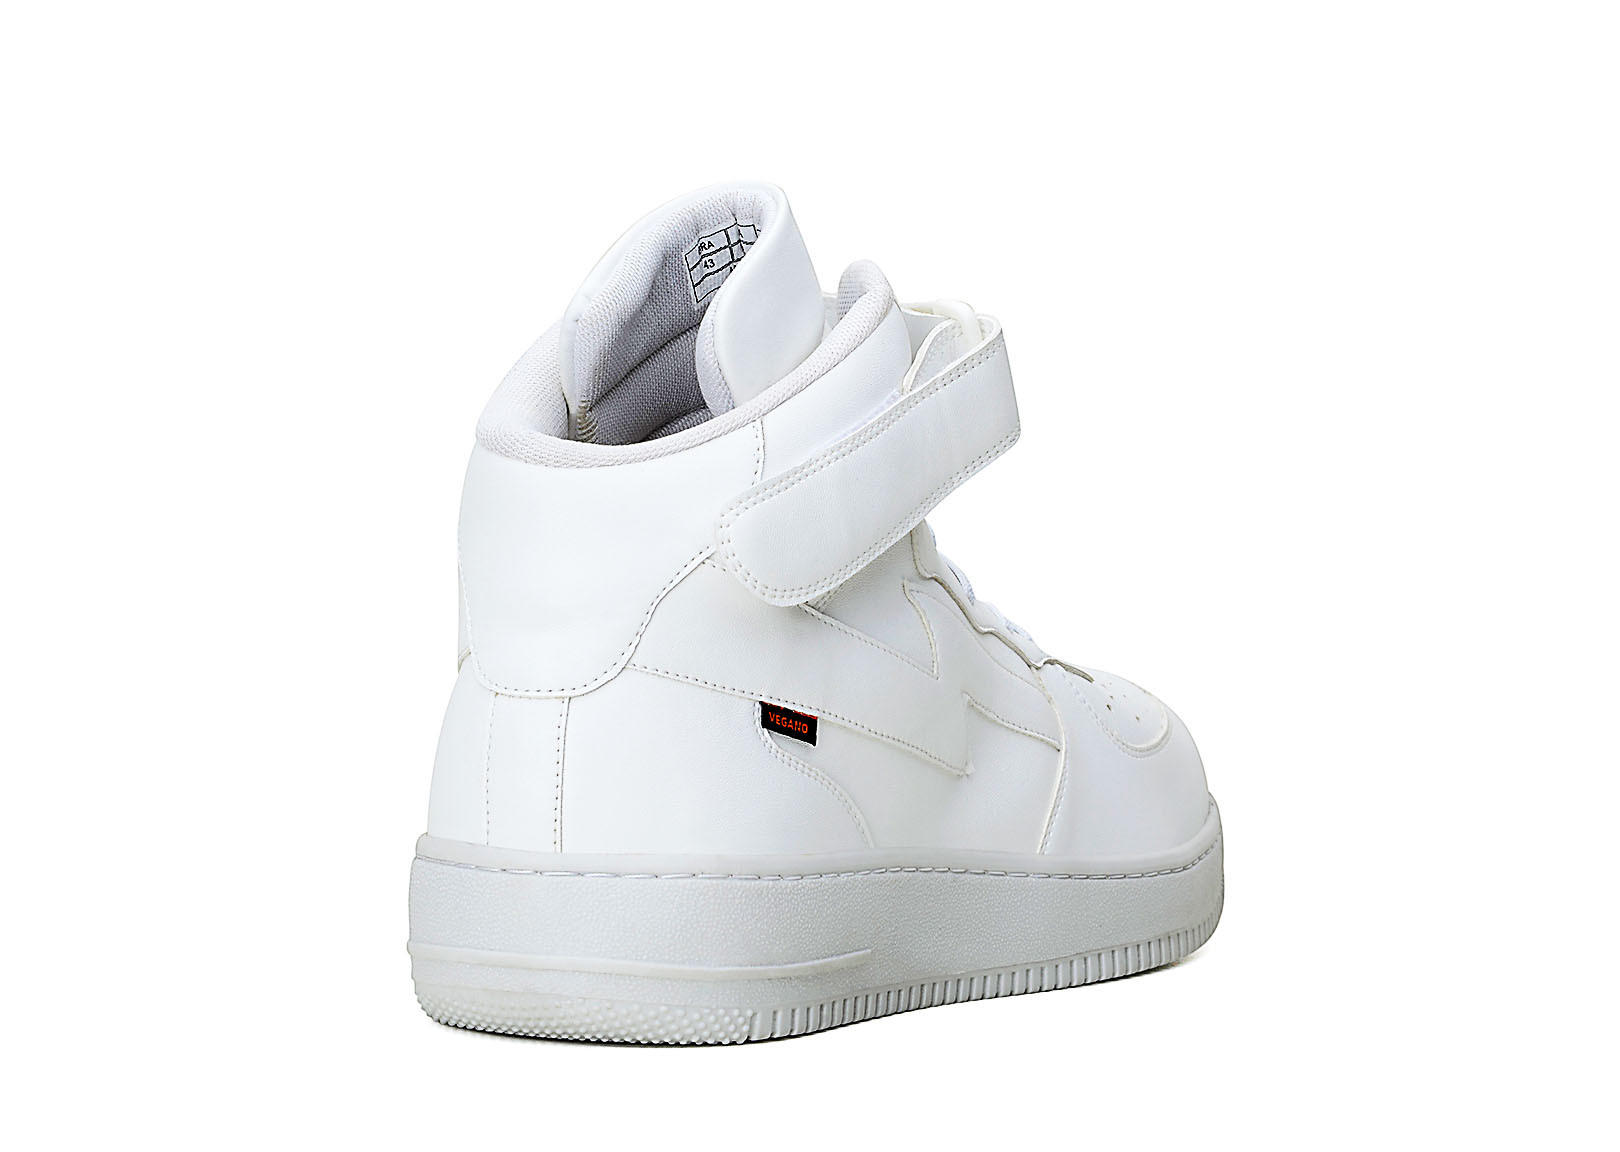 Autry Aumm shearling-lined high-top Sneakers - Farfetch